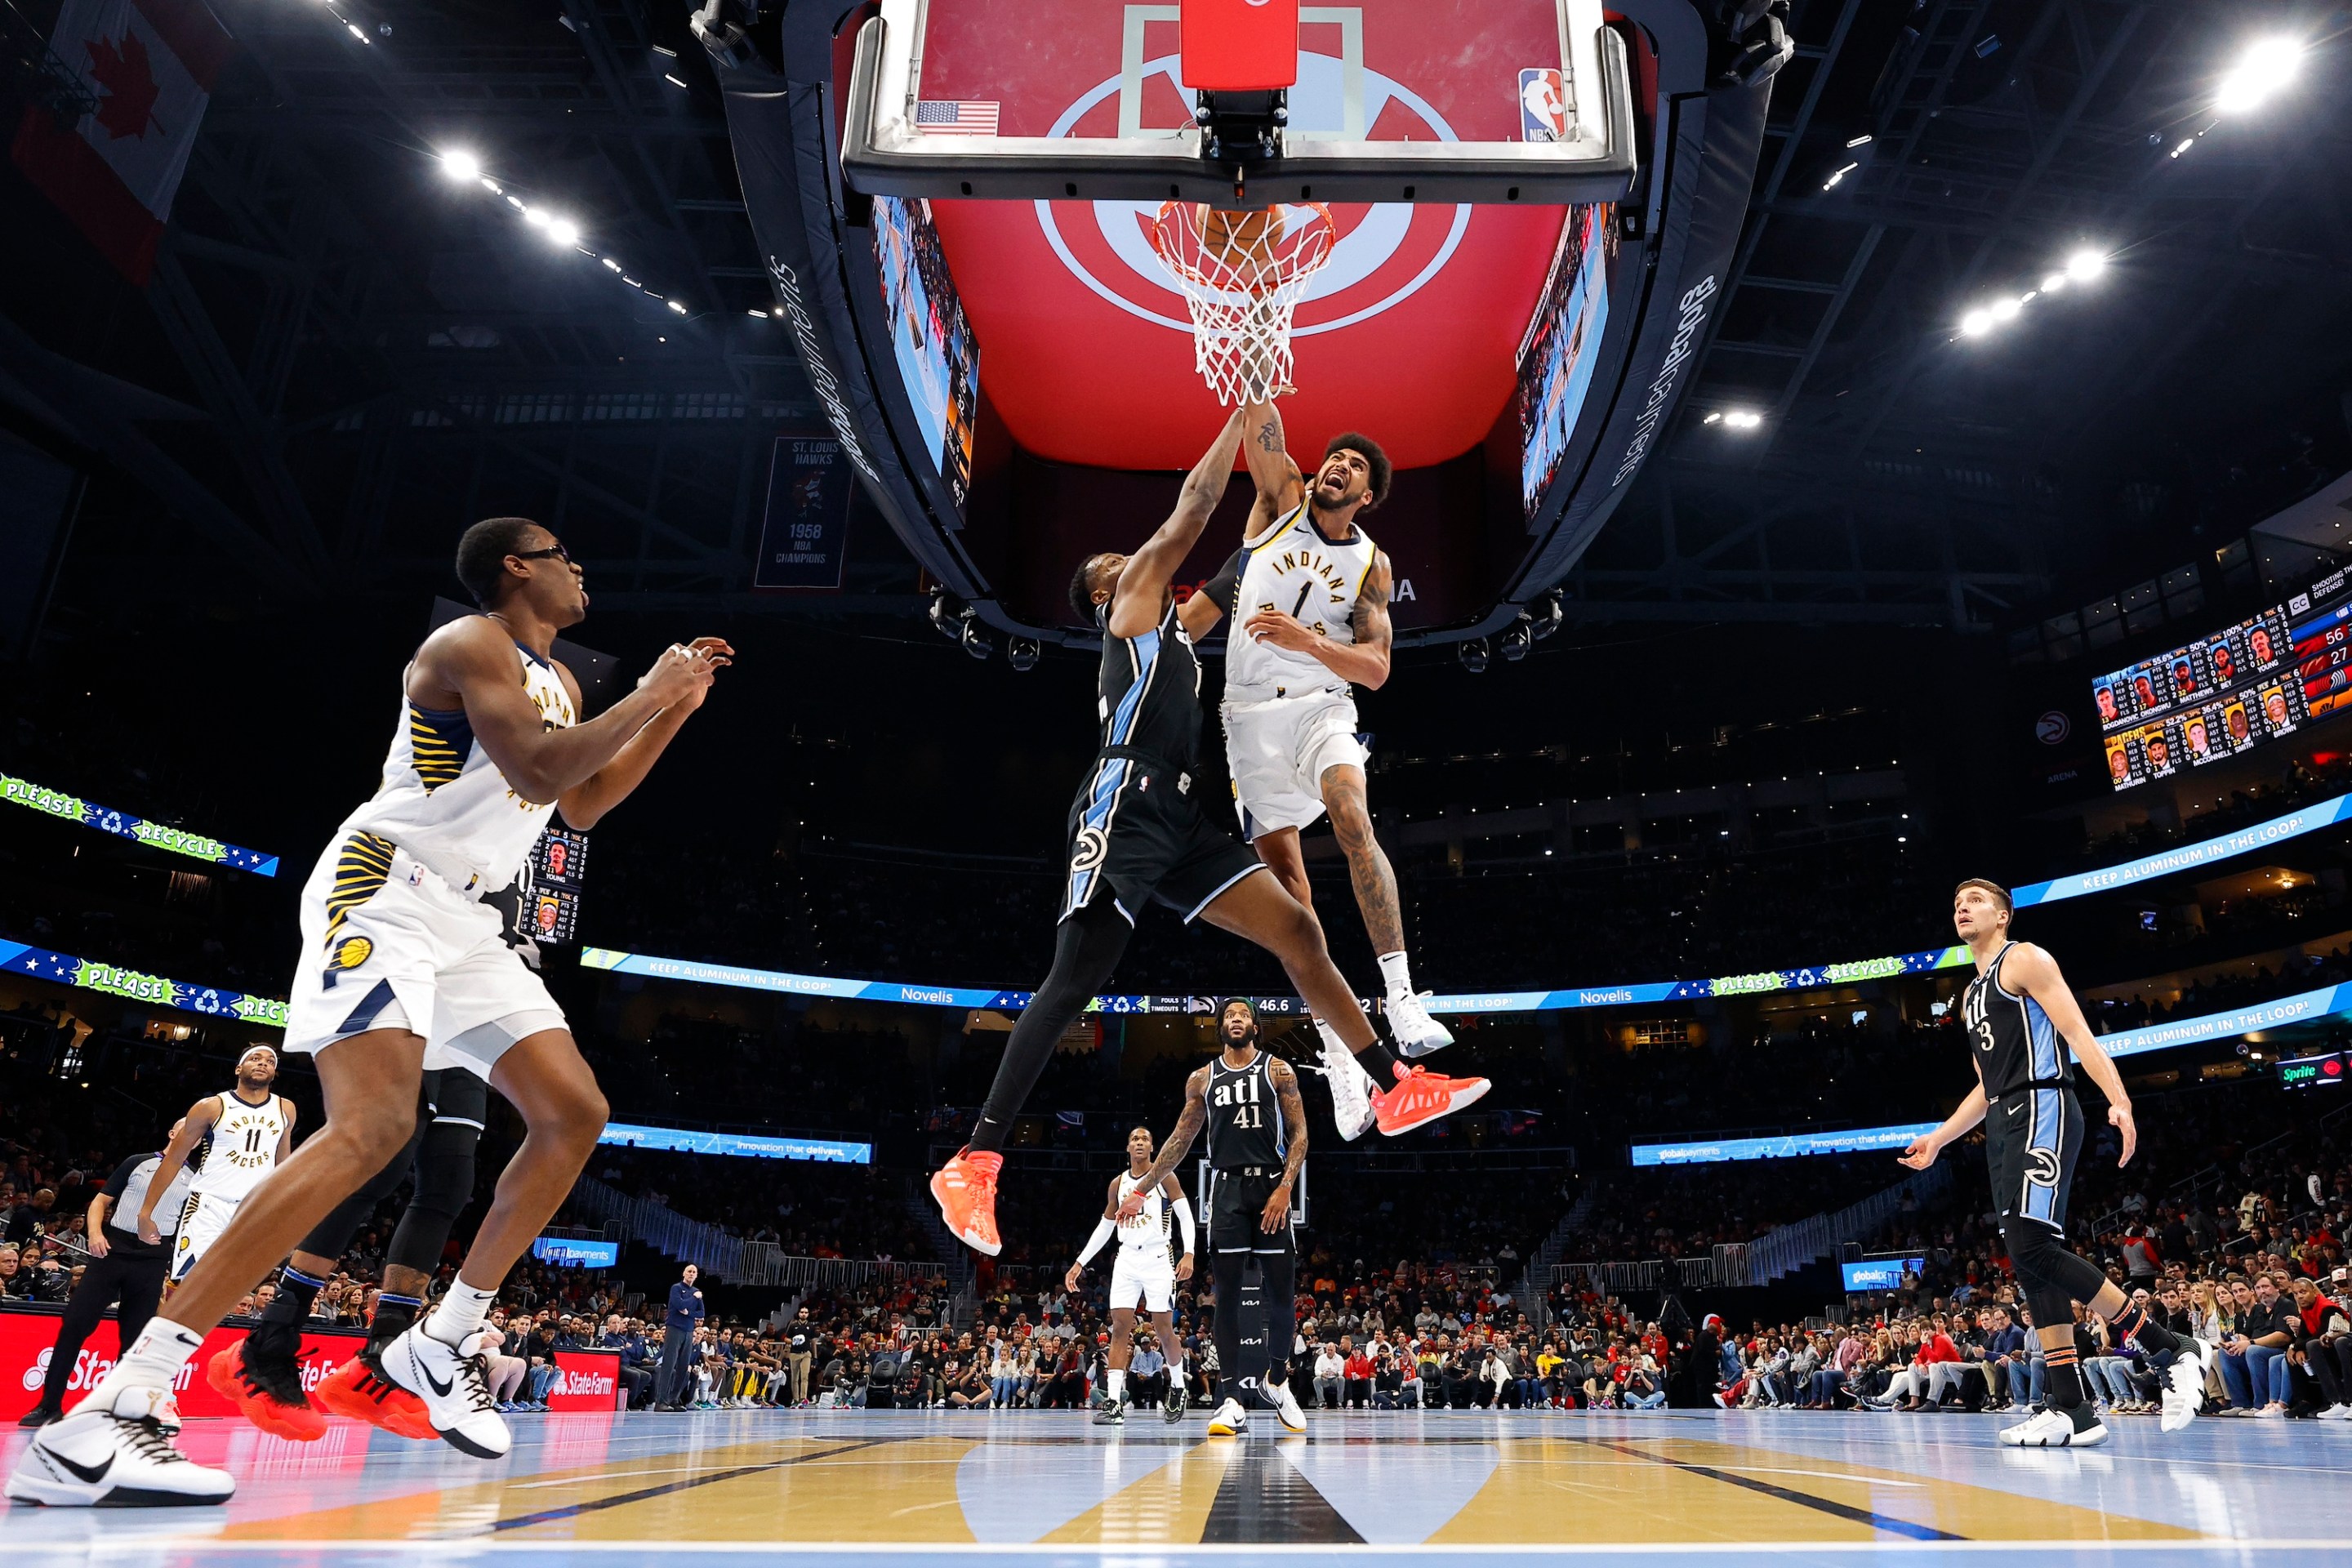 ATLANTA, GEORGIA - NOVEMBER 21: Obi Toppin #1 of the Indiana Pacers dunks against Onyeka Okongwu #17 of the Atlanta Hawks during the second quarter of an NBA In-Season Tournament game at State Farm Arena on November 21, 2023 in Atlanta, Georgia. NOTE TO USER: User expressly acknowledges and agrees that, by downloading and or using this photograph, User is consenting to the terms and conditions of the Getty Images License Agreement. (Photo by Todd Kirkland/Getty Images) *** Local Caption *** Obi Toppin; Onyeka Okongwu